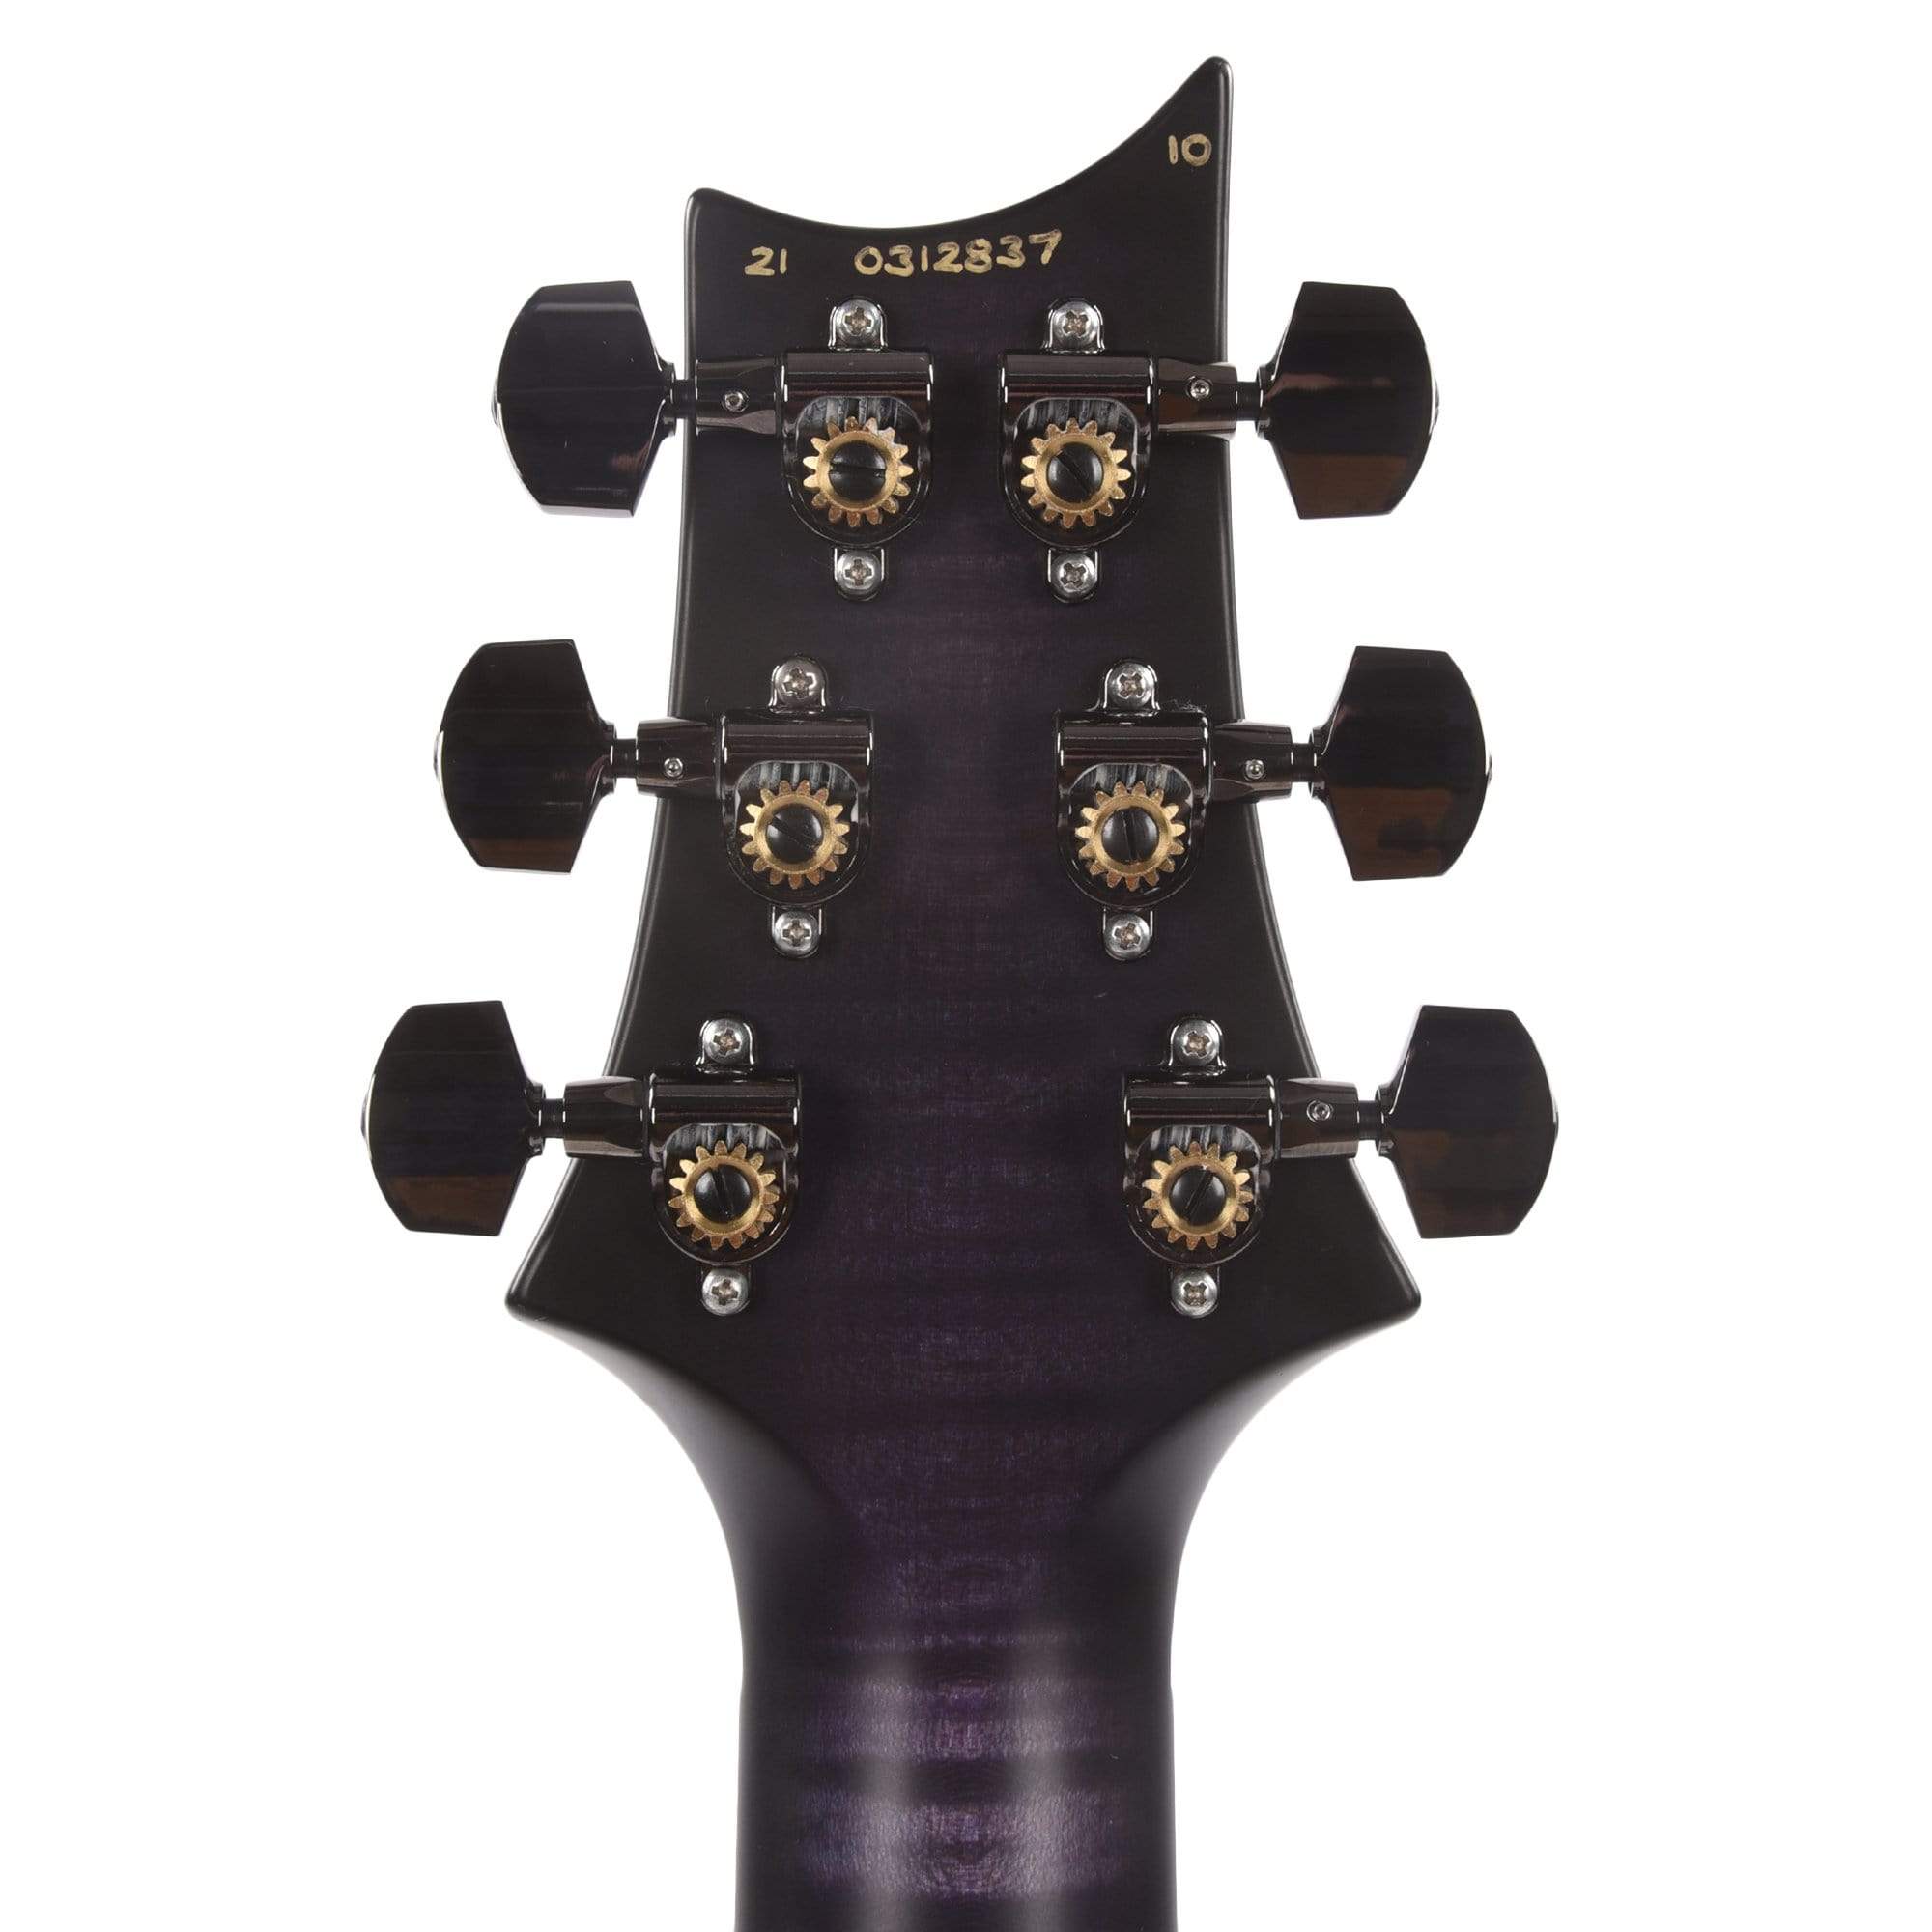 PRS Wood Library Custom 24 10 Top Flame Armando's Amethyst Smokeburst Satin w/Pattern Thin Stained Figured Maple Neck & Ebony Fingerboard Electric Guitars / Solid Body